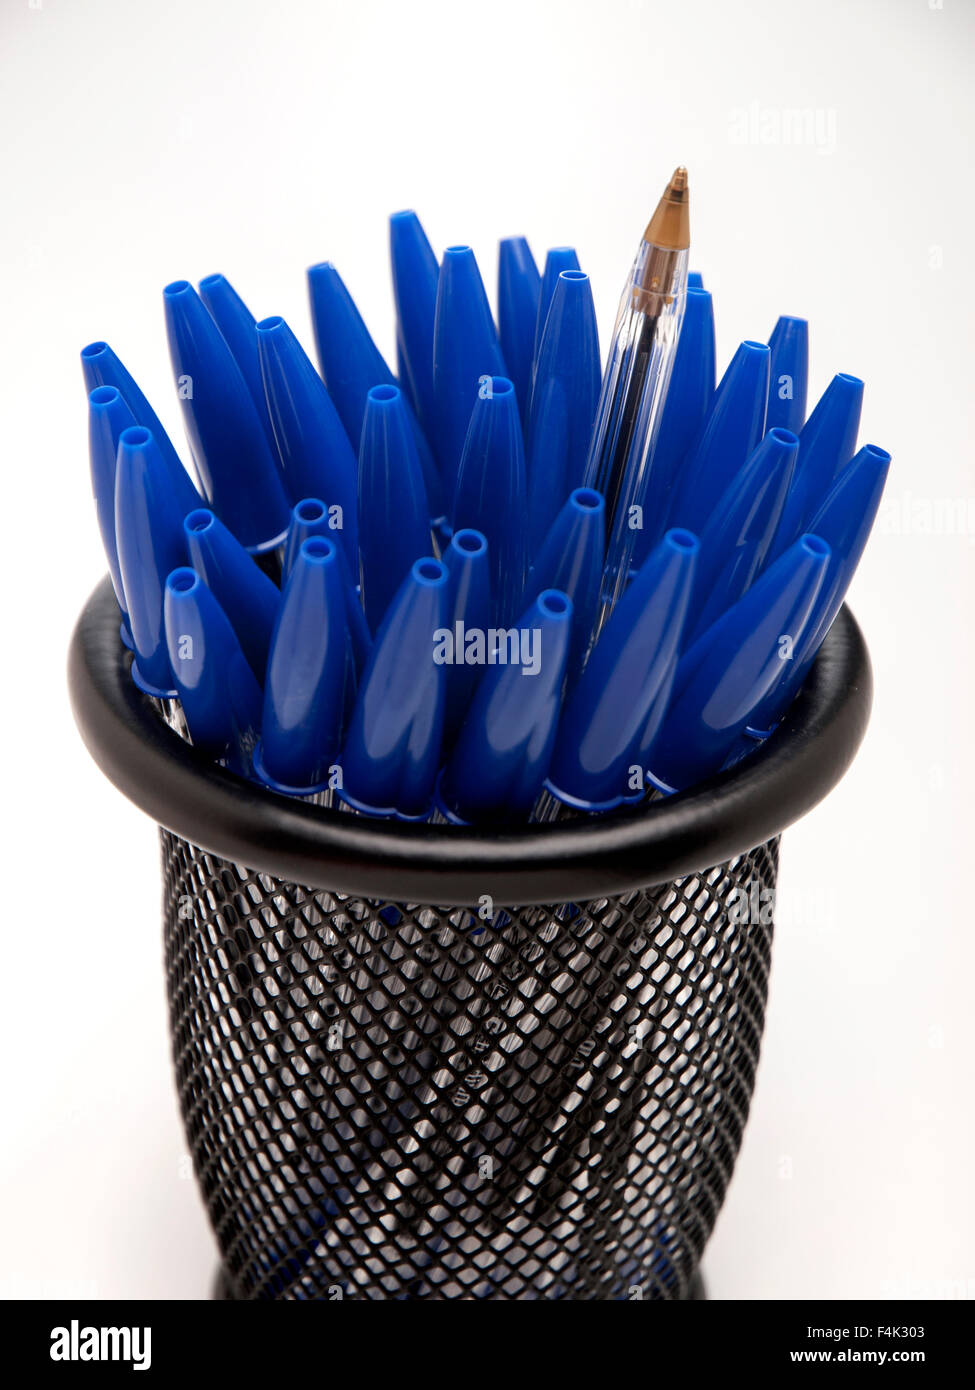 Bic Crystal Blue pens in black pencil case Stock Photo